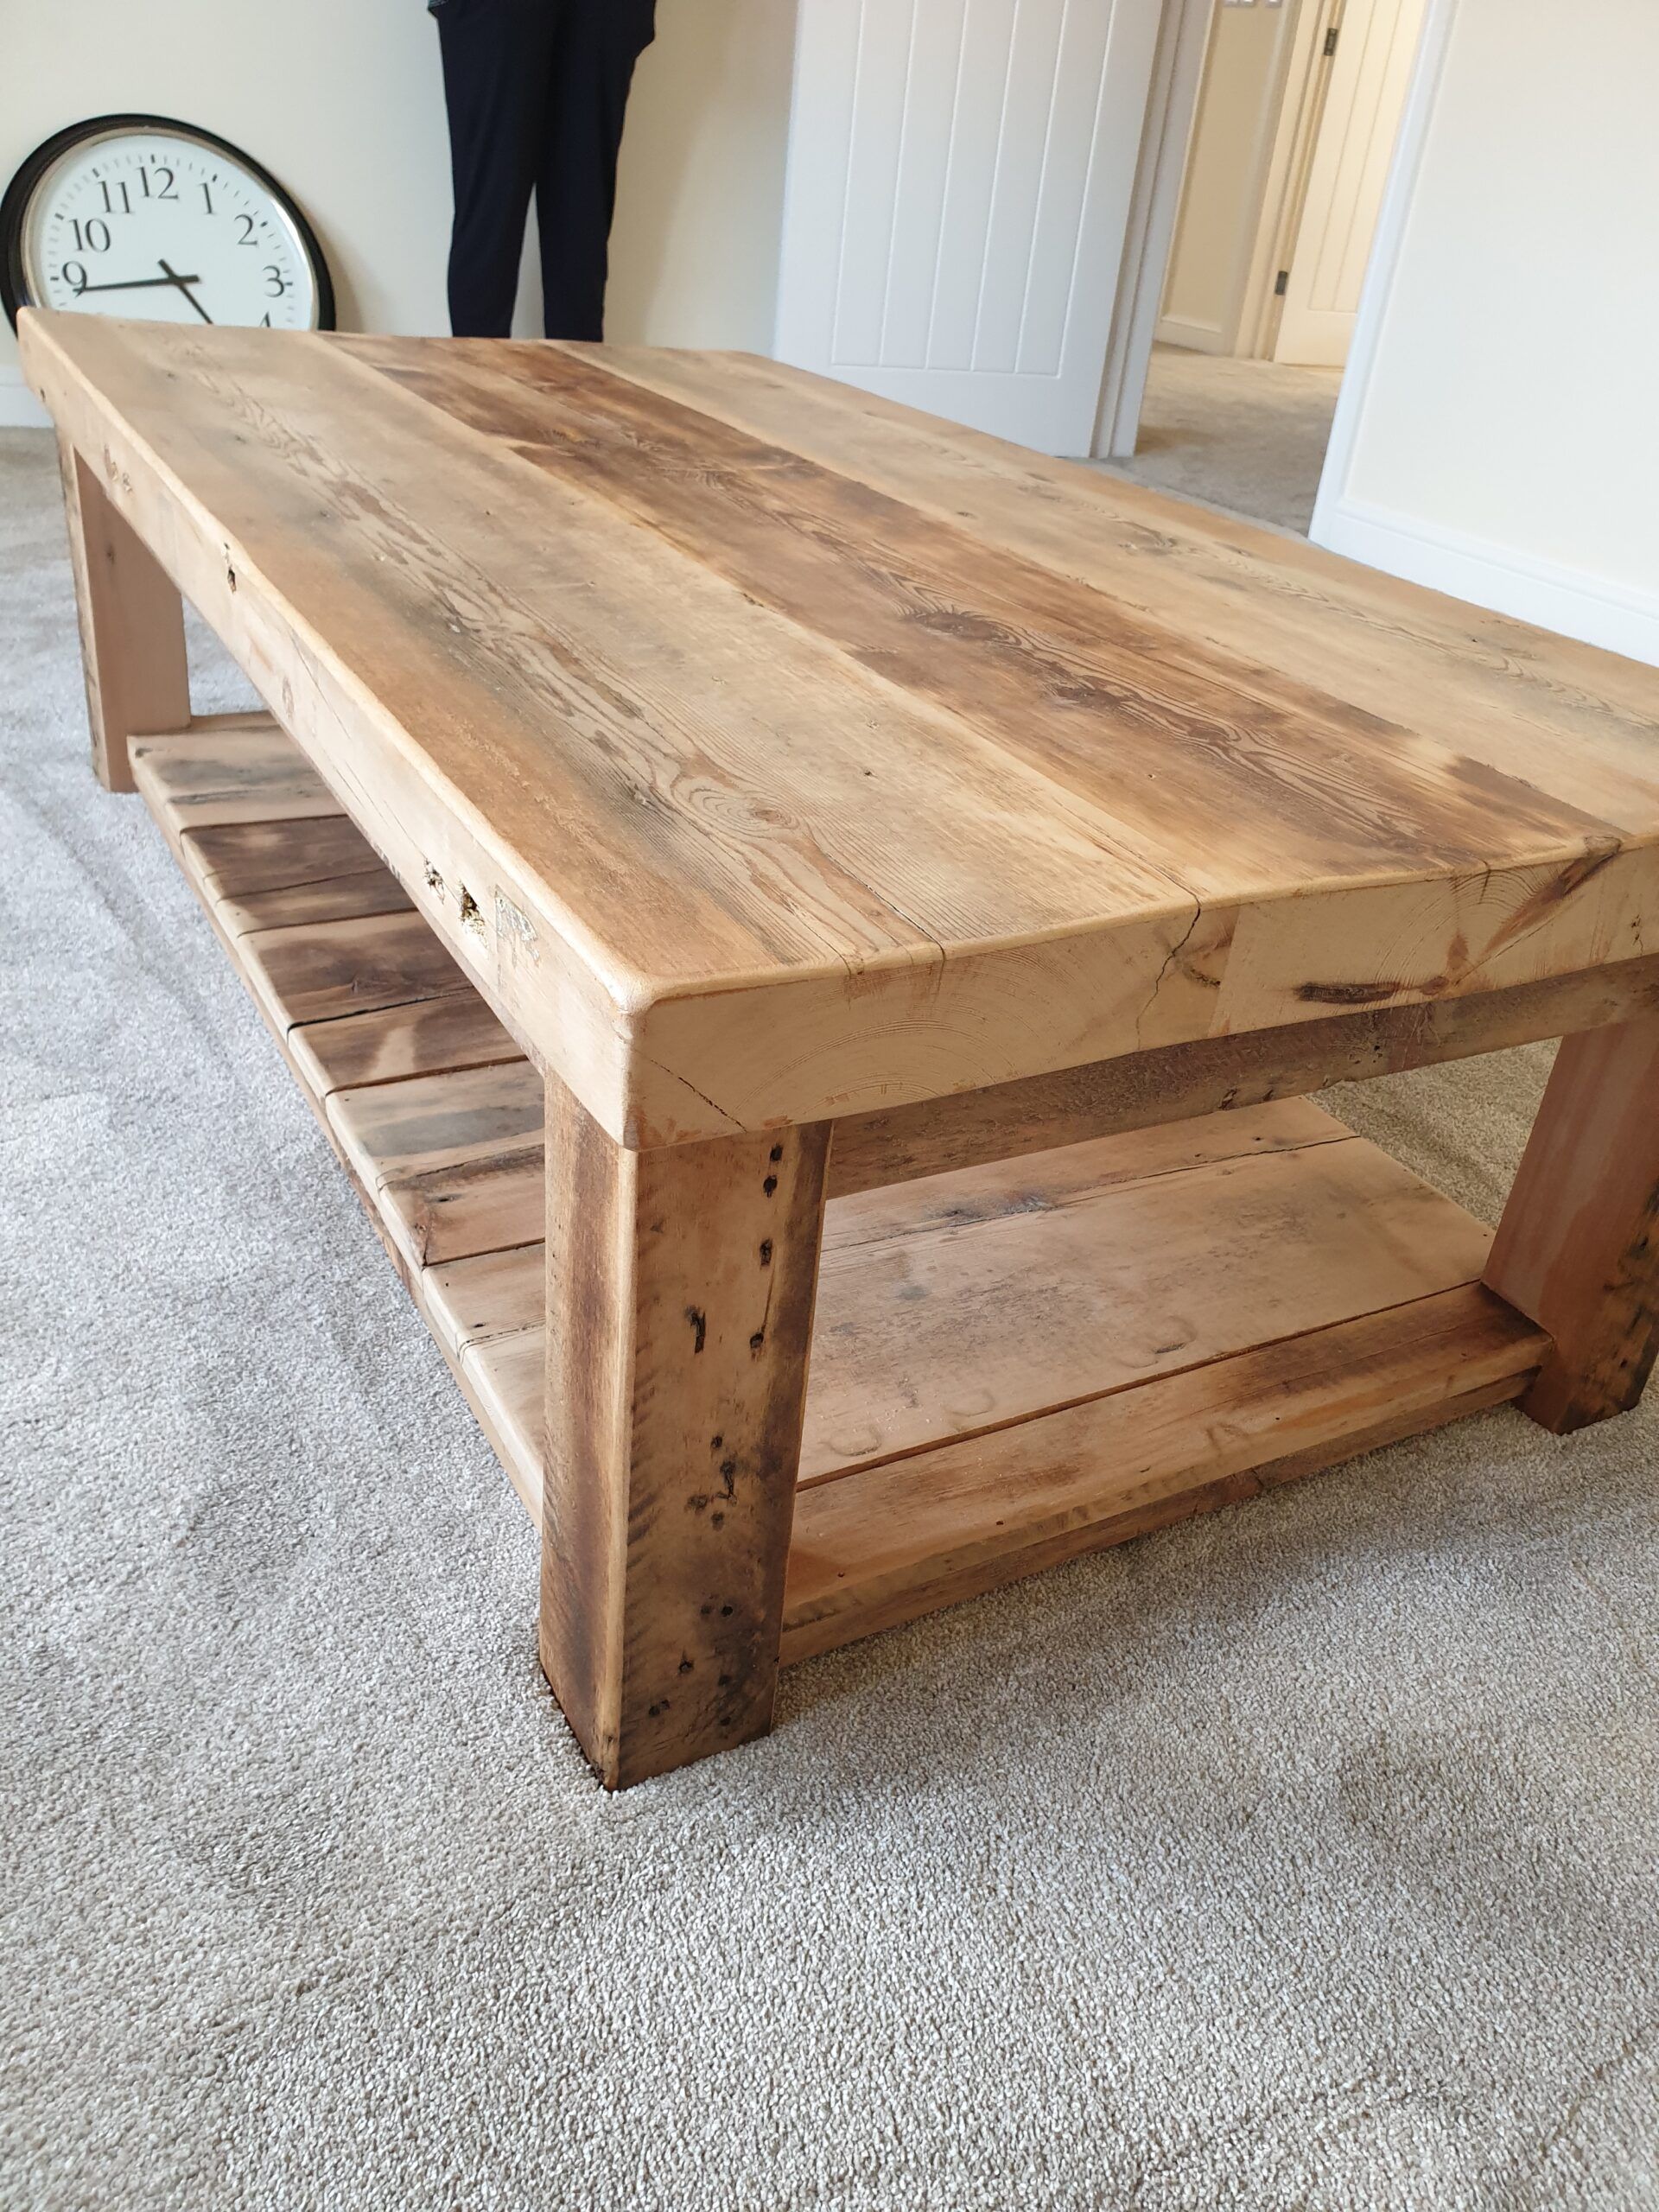 Buy Rustic Wood Coffee Table Made From Reclaimed Timber For Rustic Wood Coffee Tables (View 2 of 15)